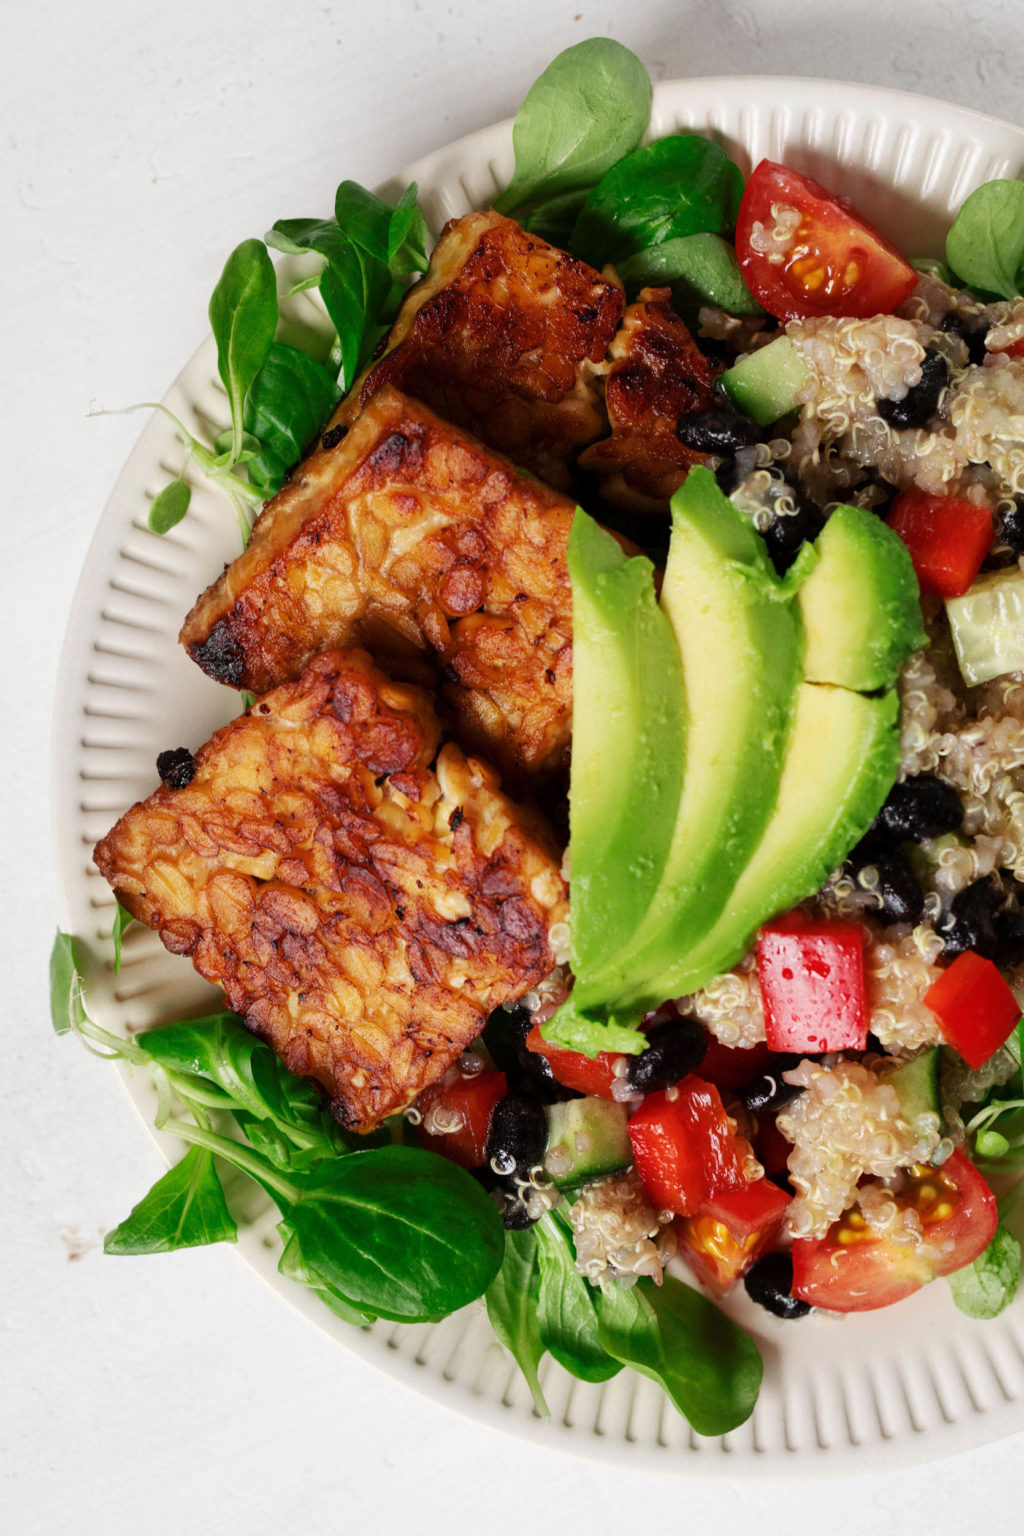 Seared, square slices of tempeh are arranged with avocado and vegetables on a salad plate.